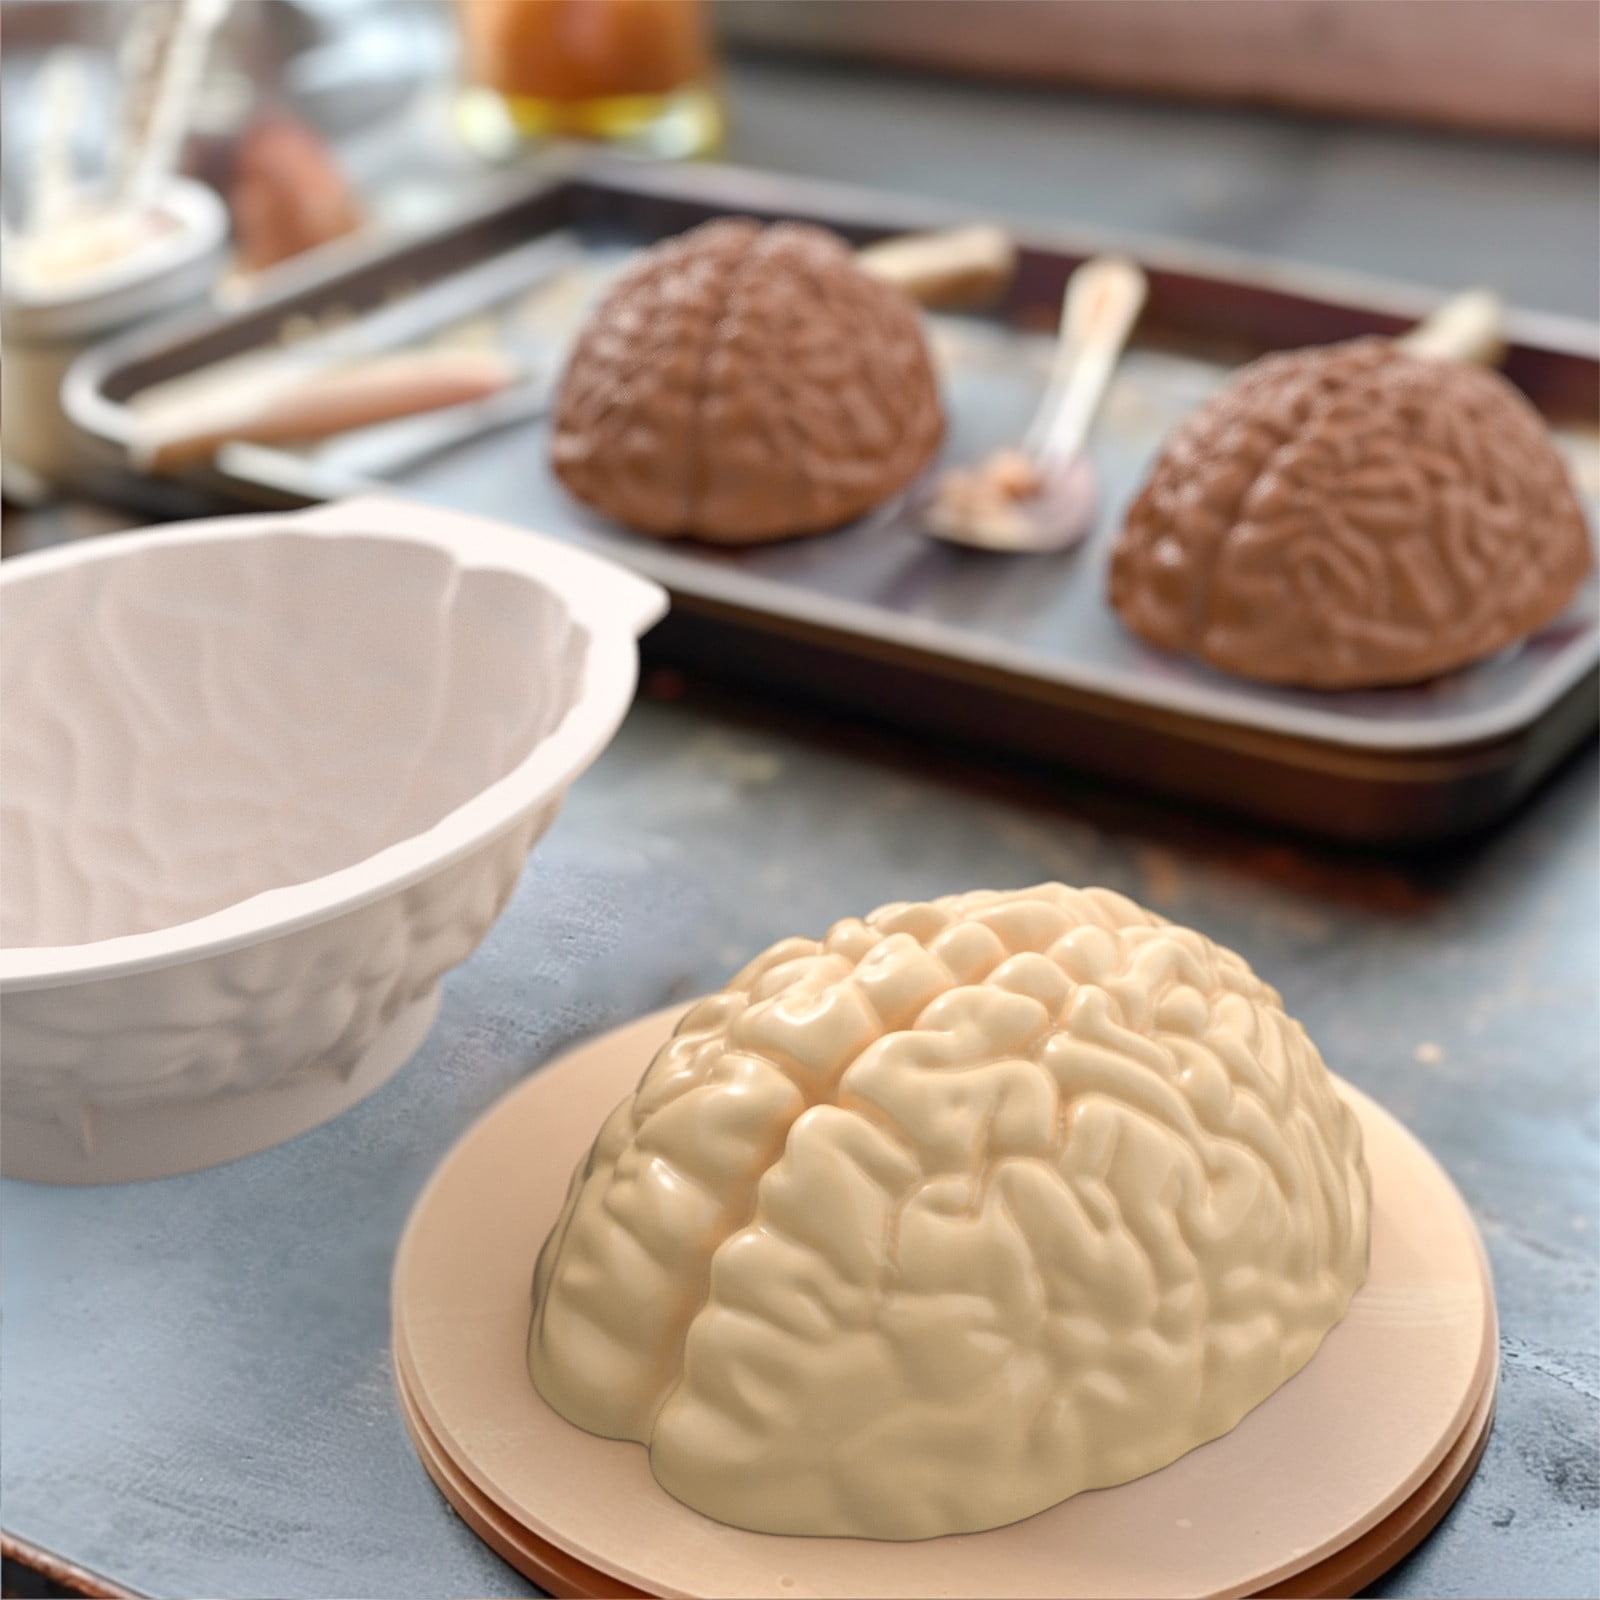 How To Cake It's Yolanda Gampp creates BRAIN cake just in time for Halloween  | Daily Mail Online